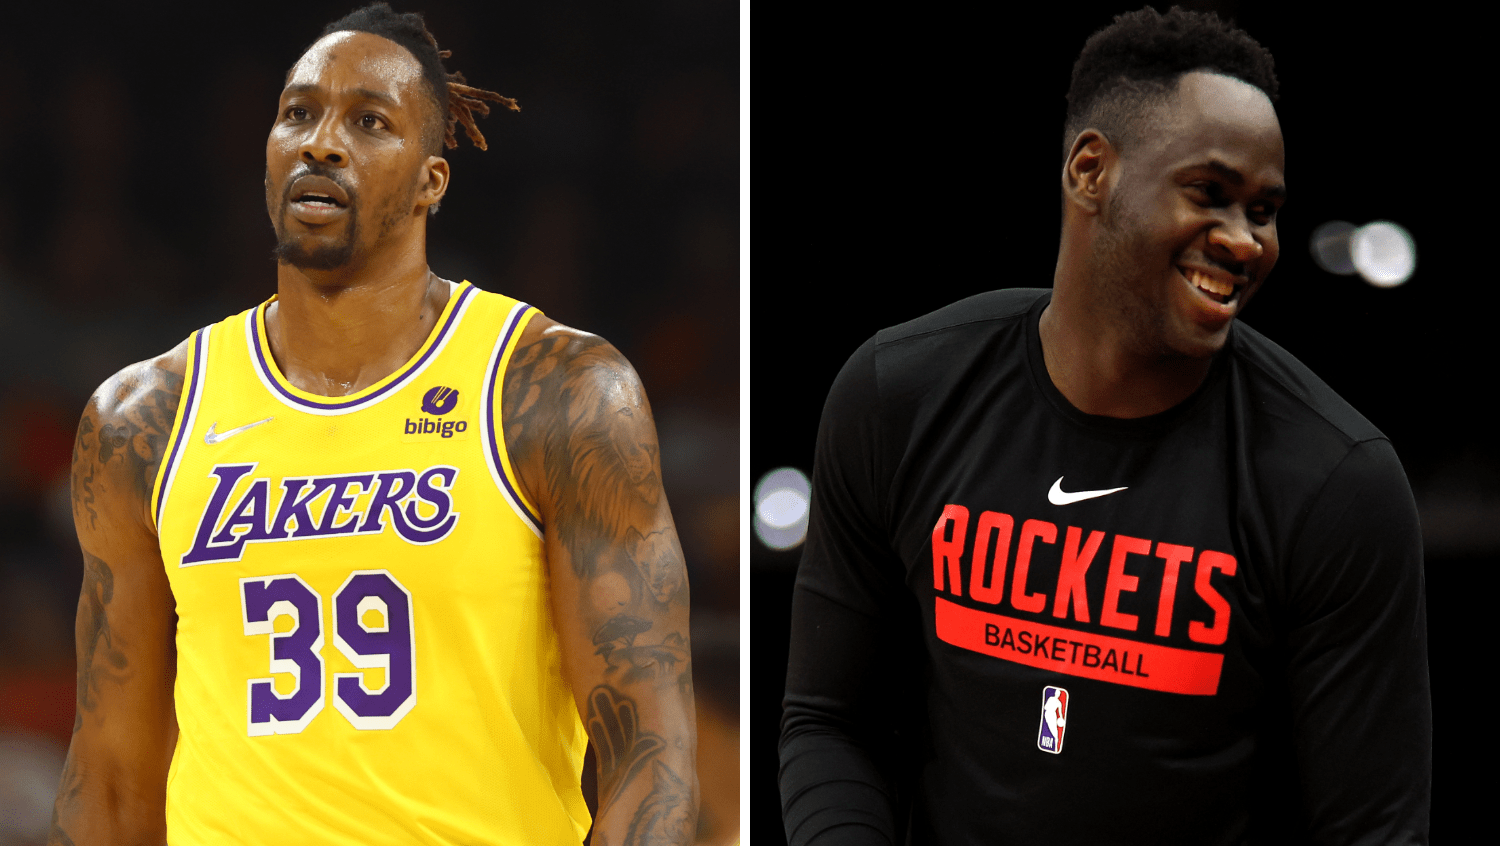 warriors-contend-with-their-roster-do-not-sign-dwight-howard